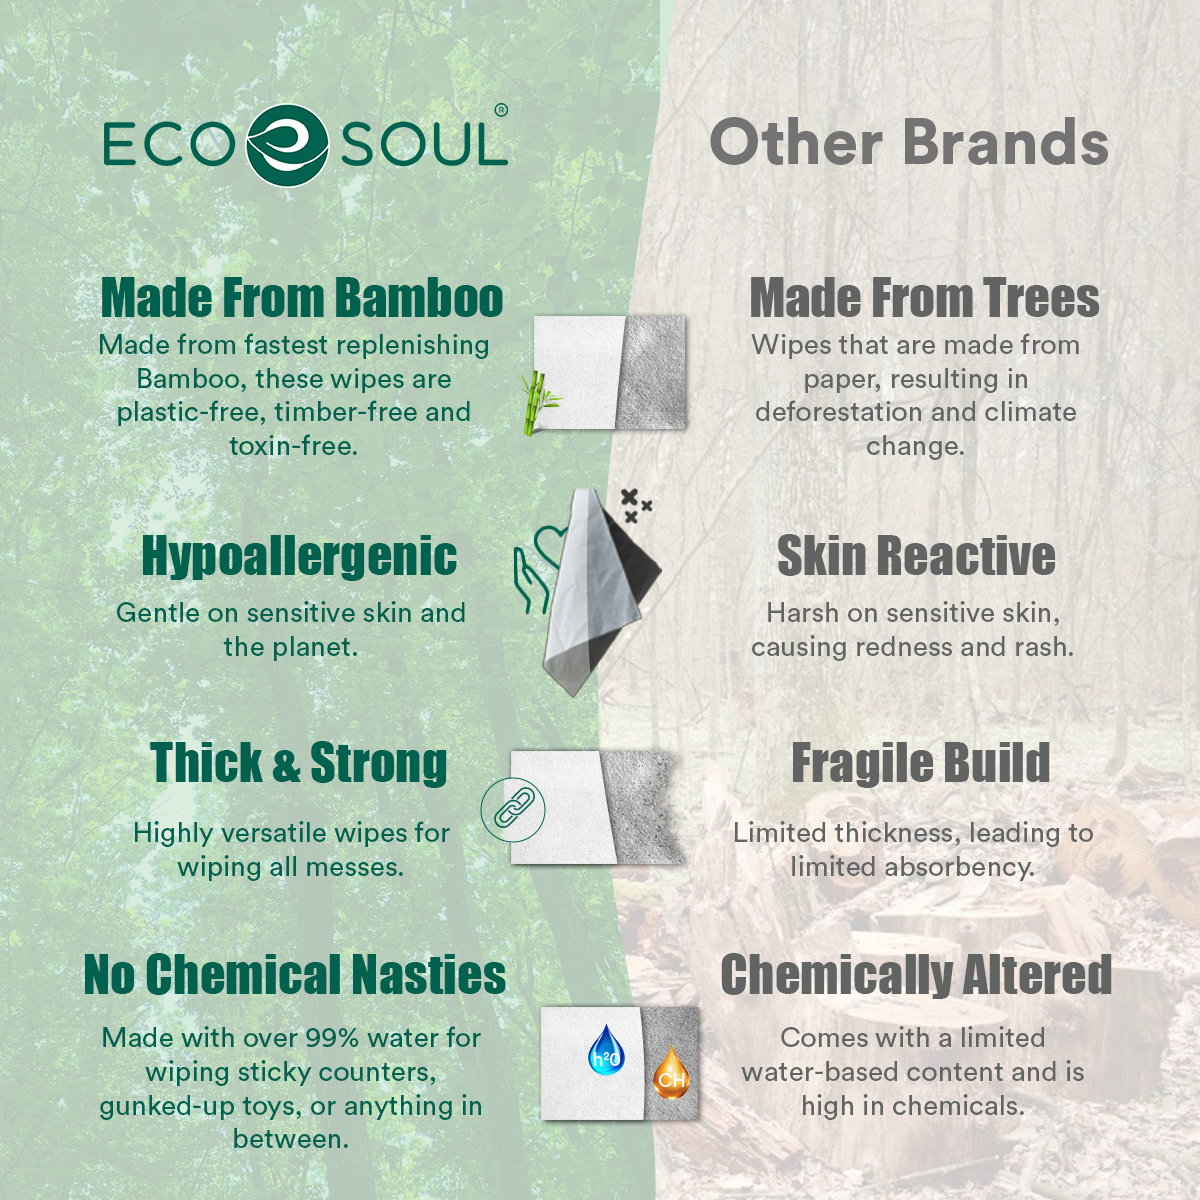 Benefits of using Eco Soul Bamboo Premium Wipes when compared to other brands tree material wipes